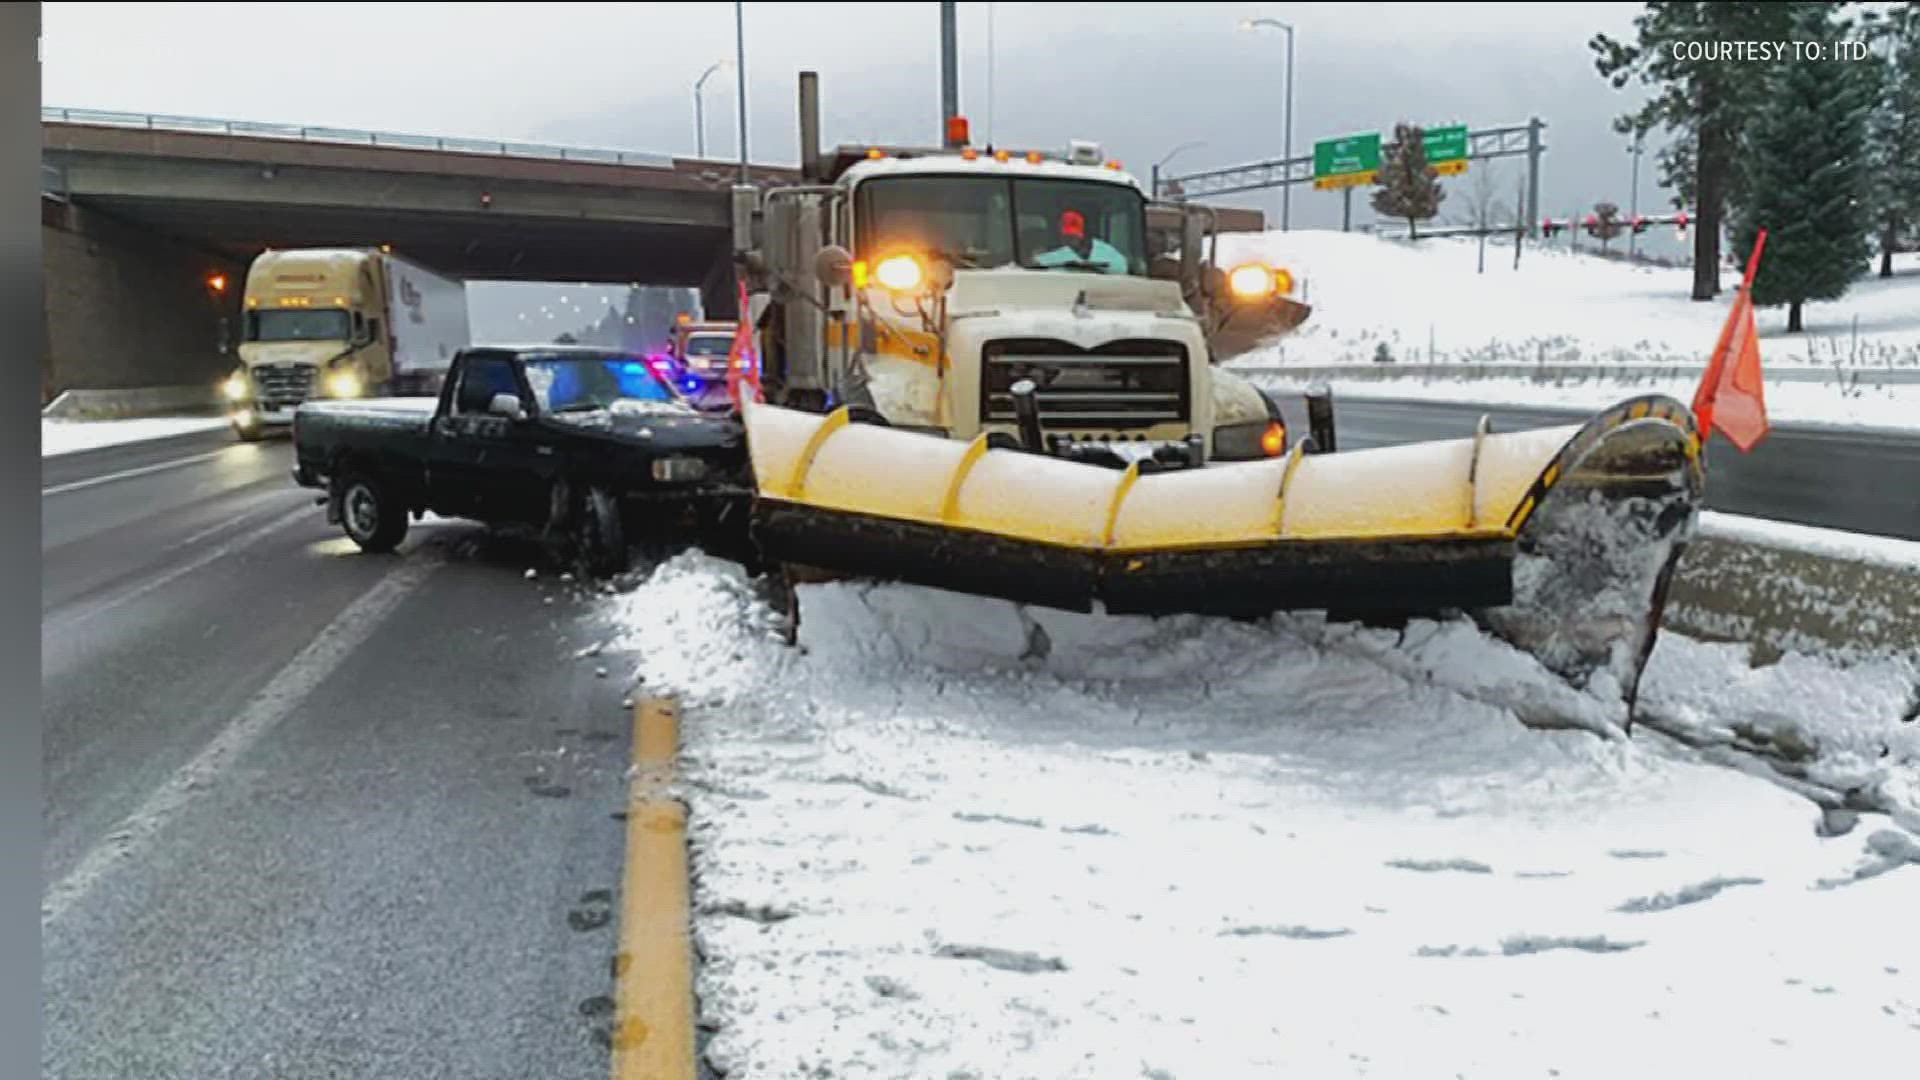 With snow in the forecast across the state, Idaho Transportation Department wants to remind the public how to travel safely with plows on the road.